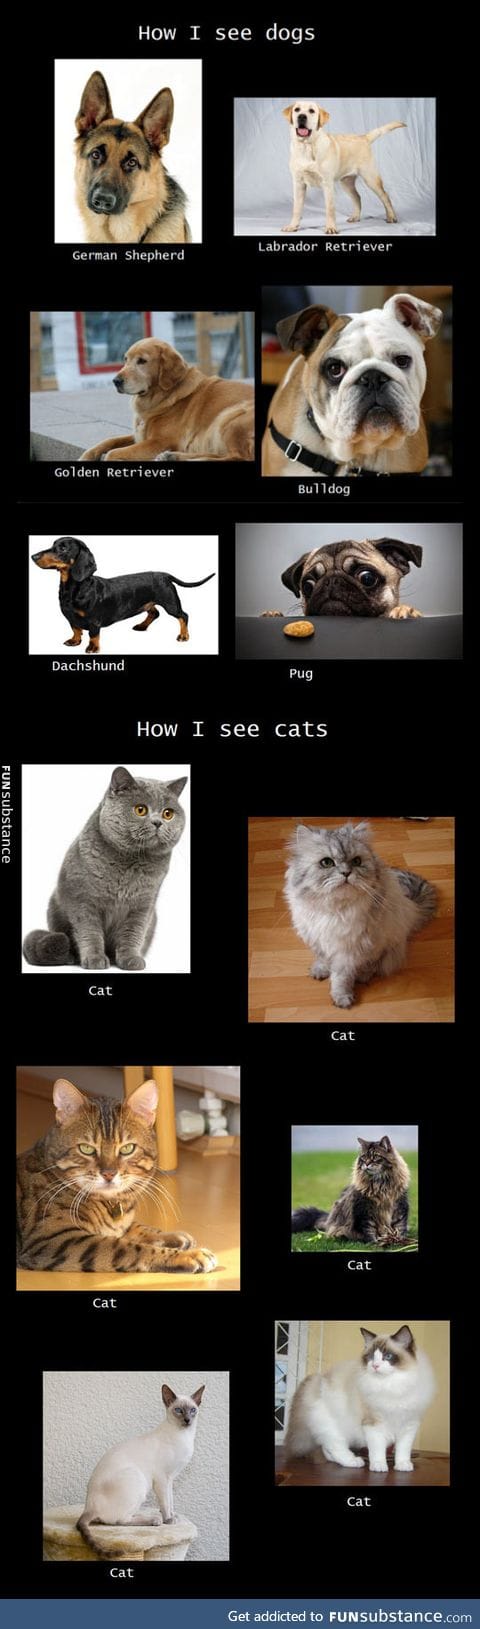 How I see pets